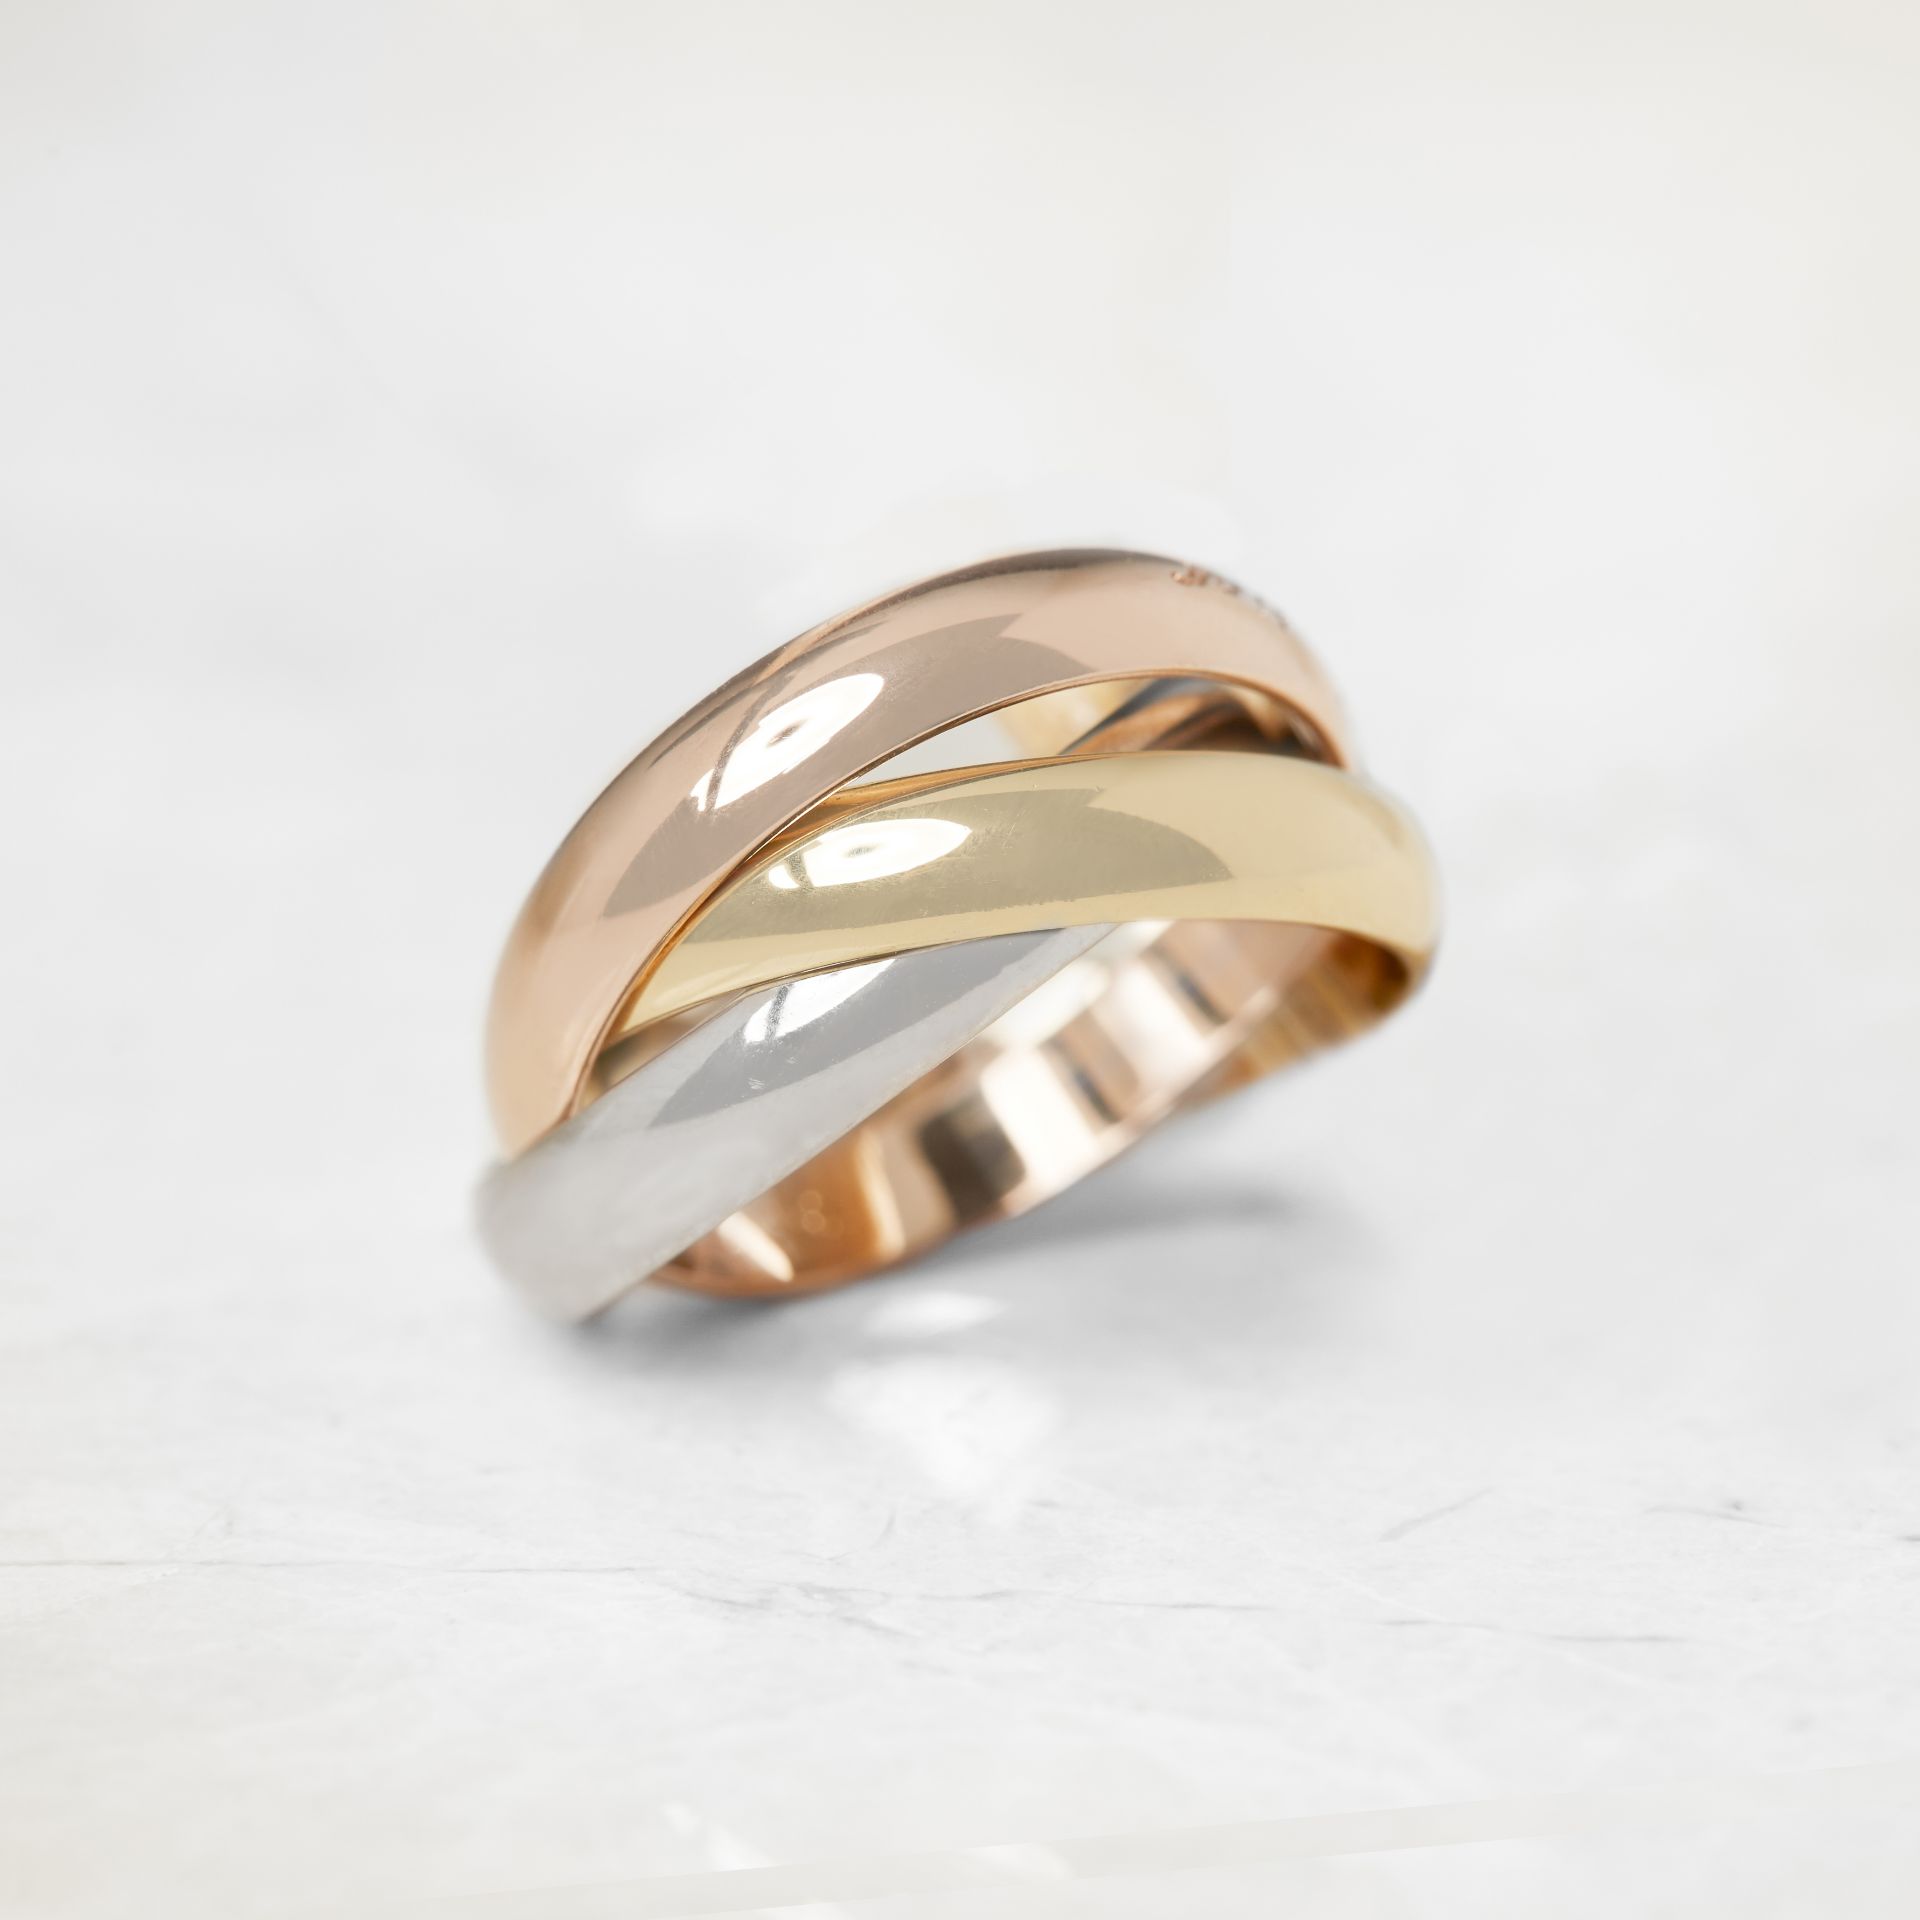 Cartier 18k Yellow, White & Rose Gold Trinity Ring - Image 17 of 17